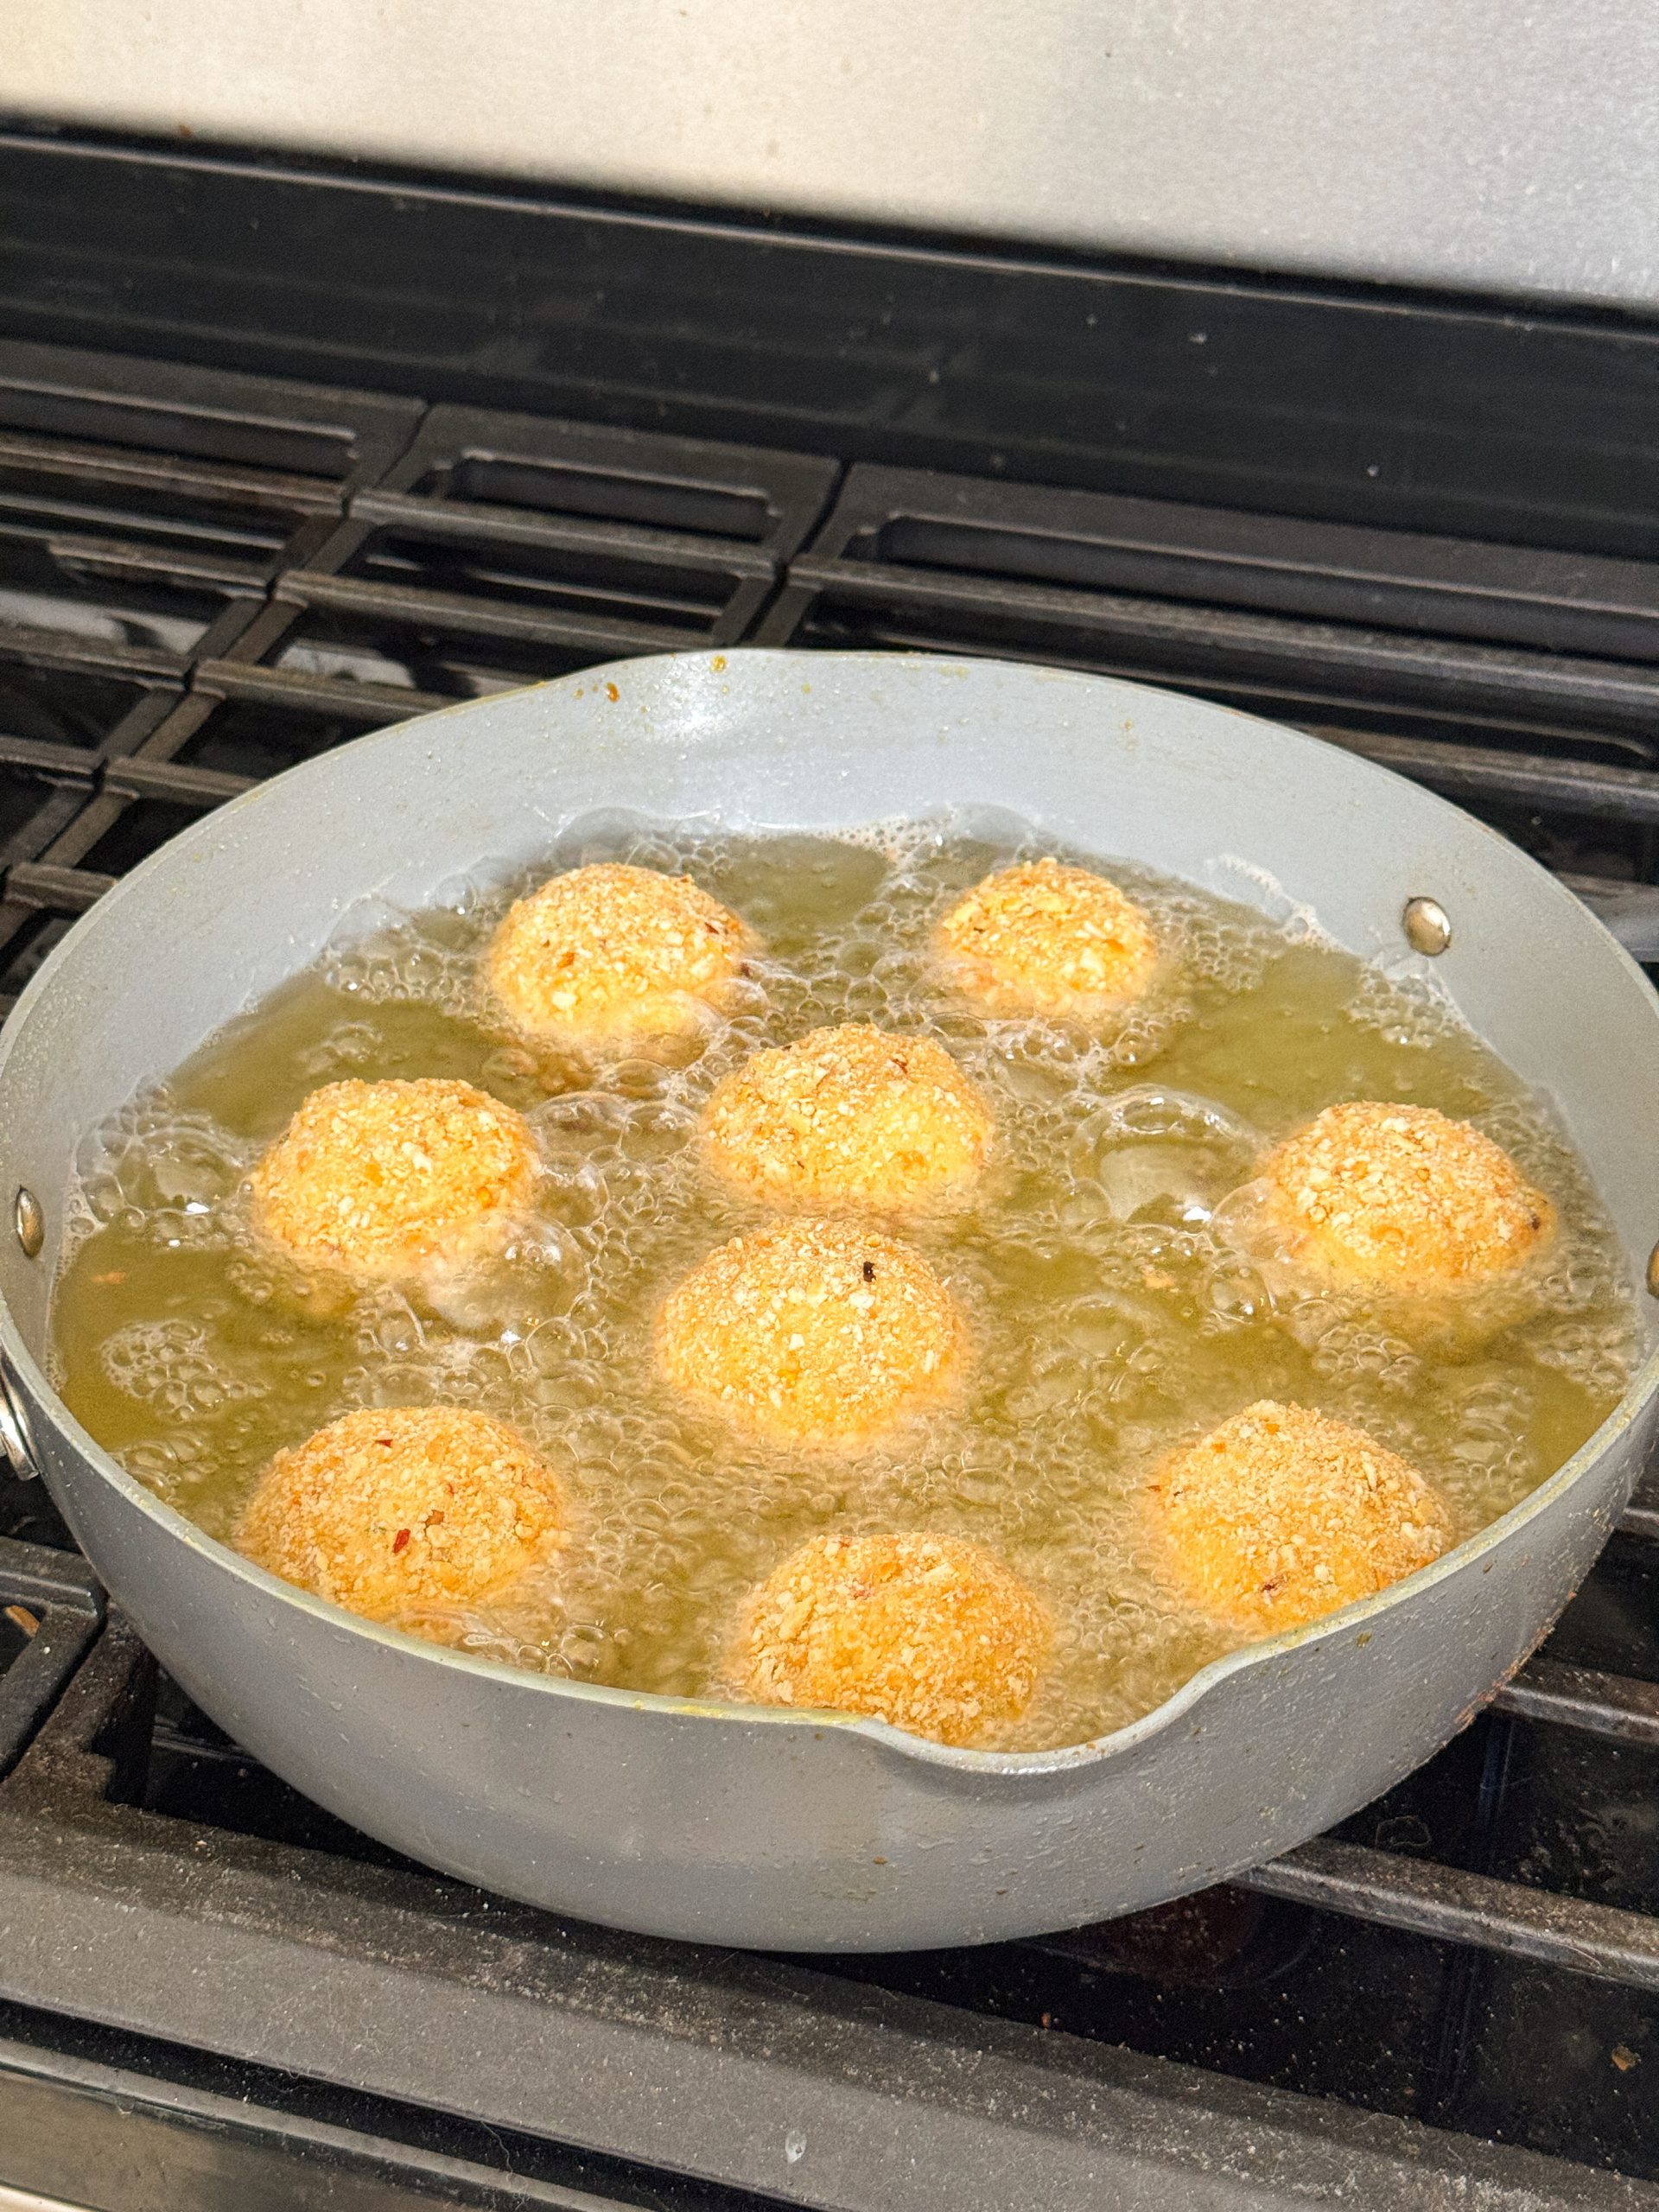 mashed potato balls being fried in a large skillet